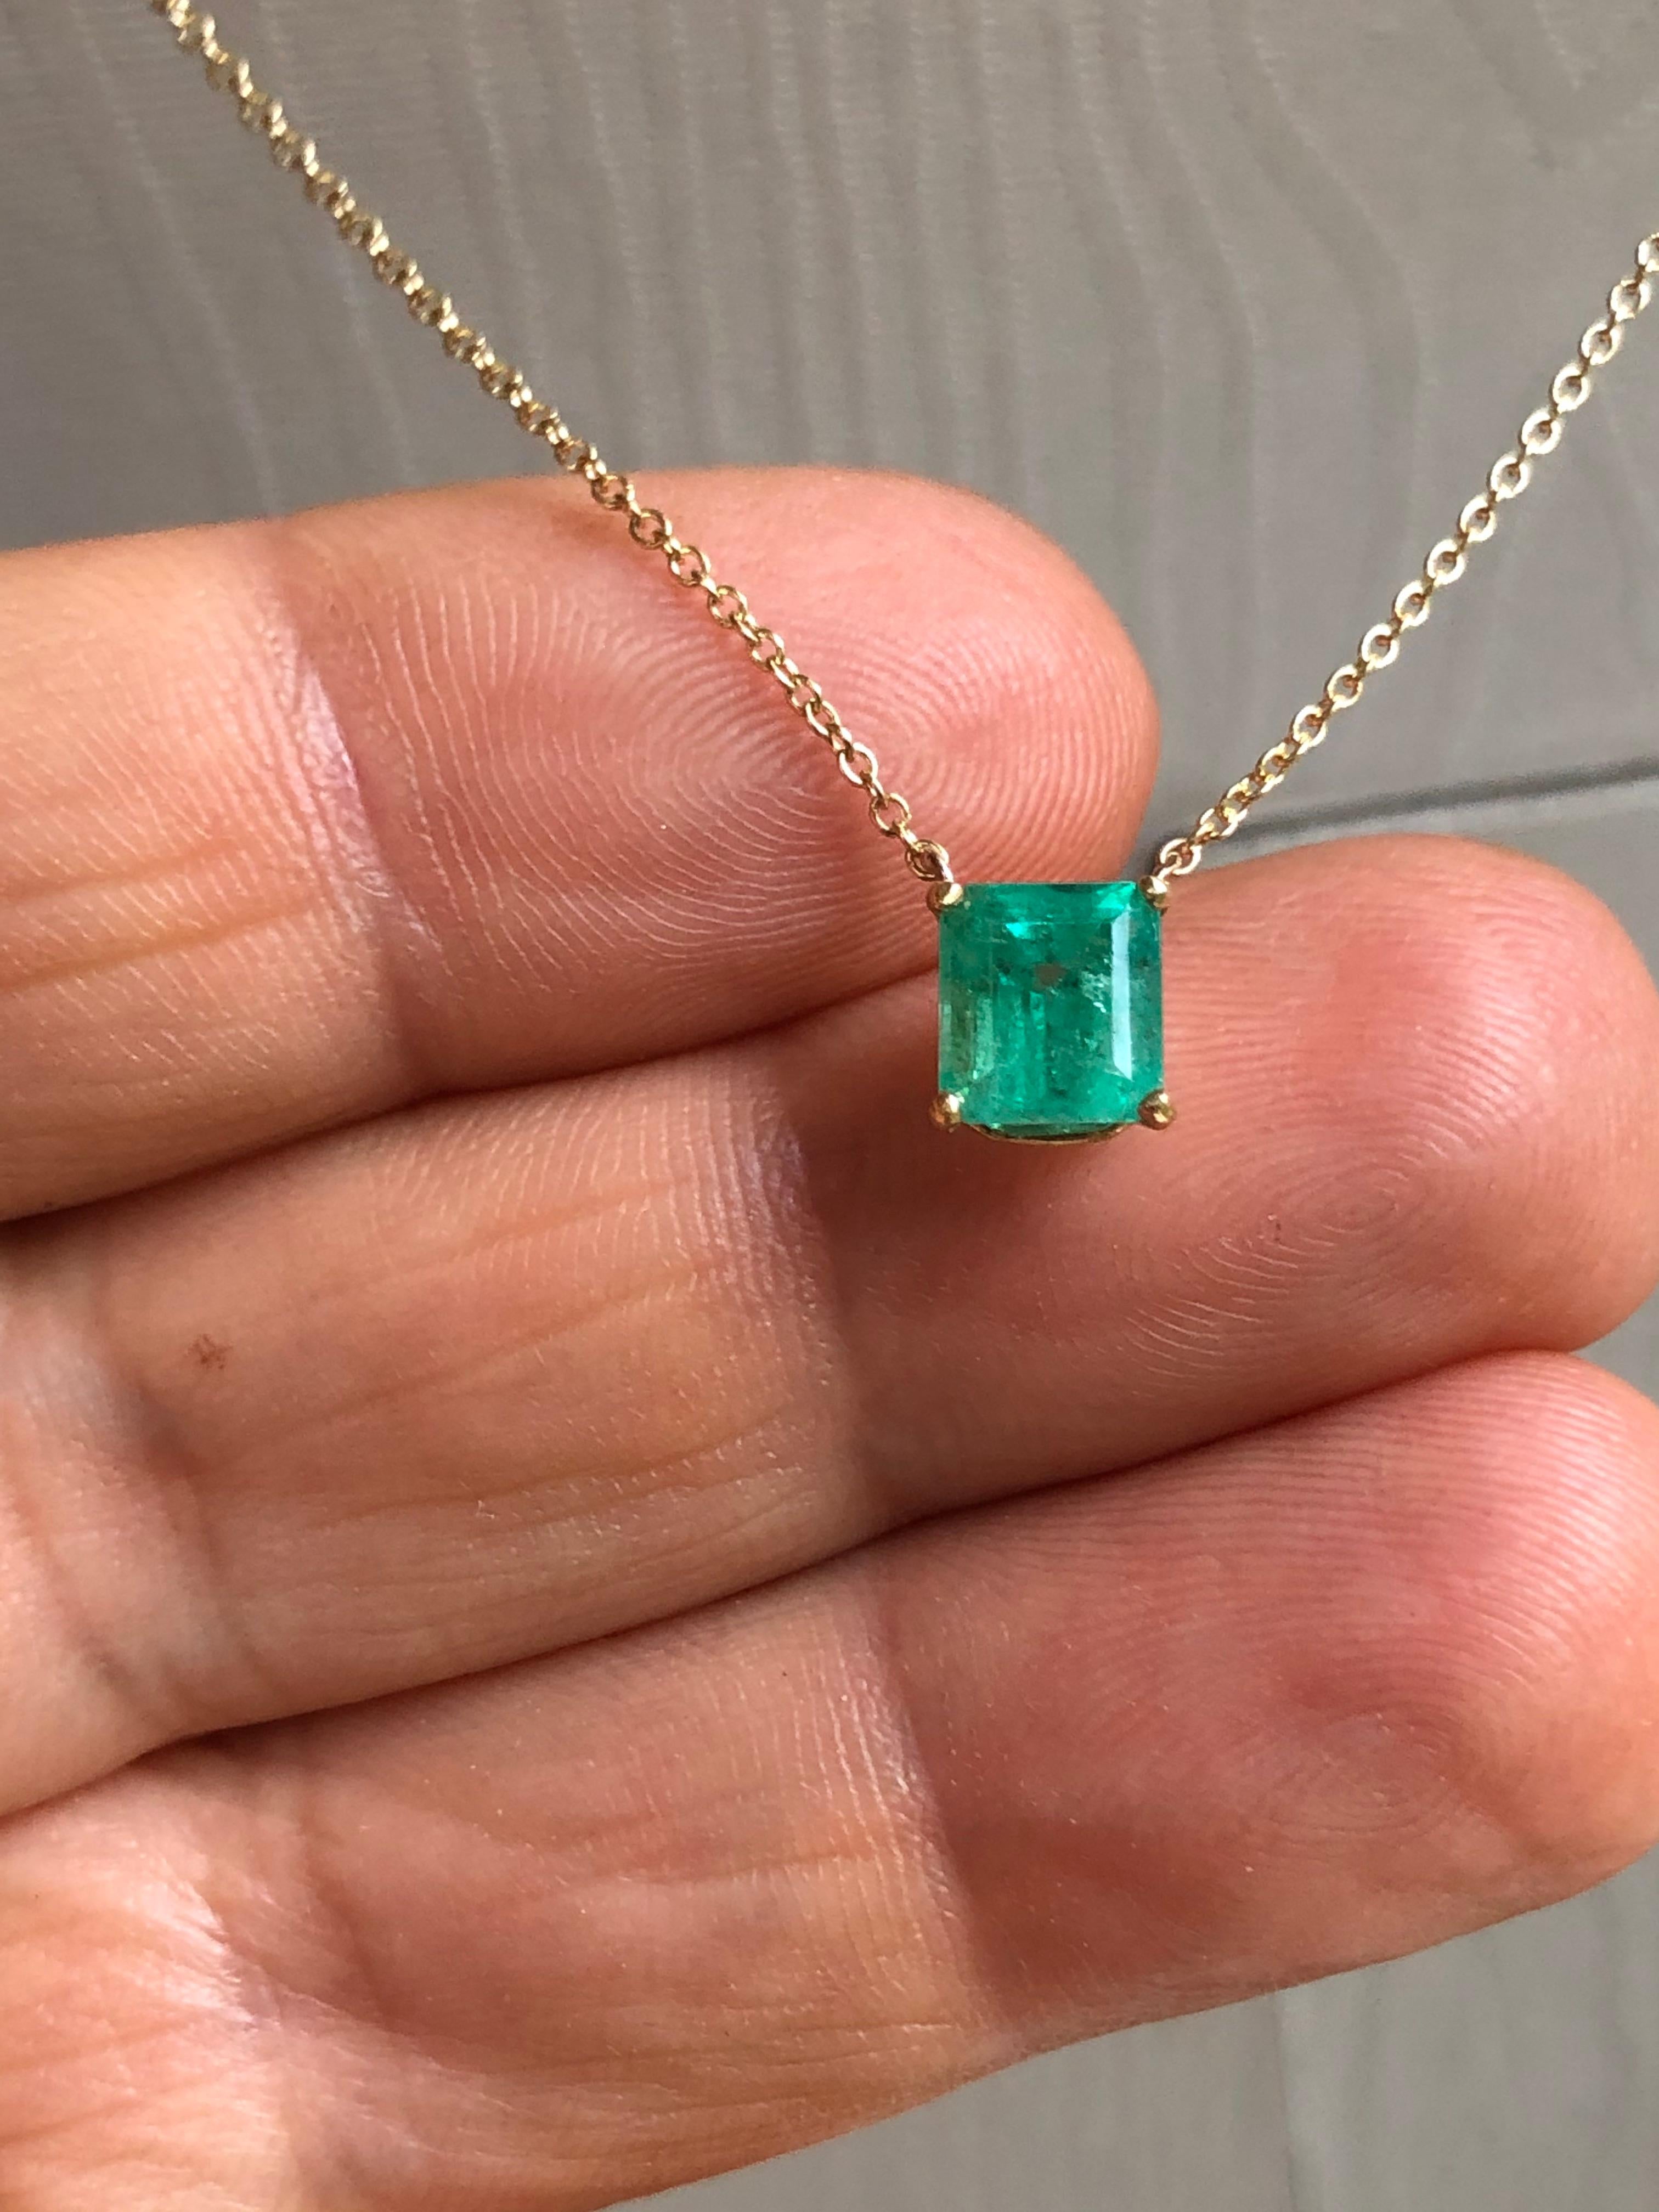 This drop solitaire pendant necklace features an emerald l cut,  medium green natural  Colombian emerald weighing 1.50 carats. Set in 18K yellow Gold setting and fixed to a 18 Inches long, Gold chain.  Very style good for every day wear!
